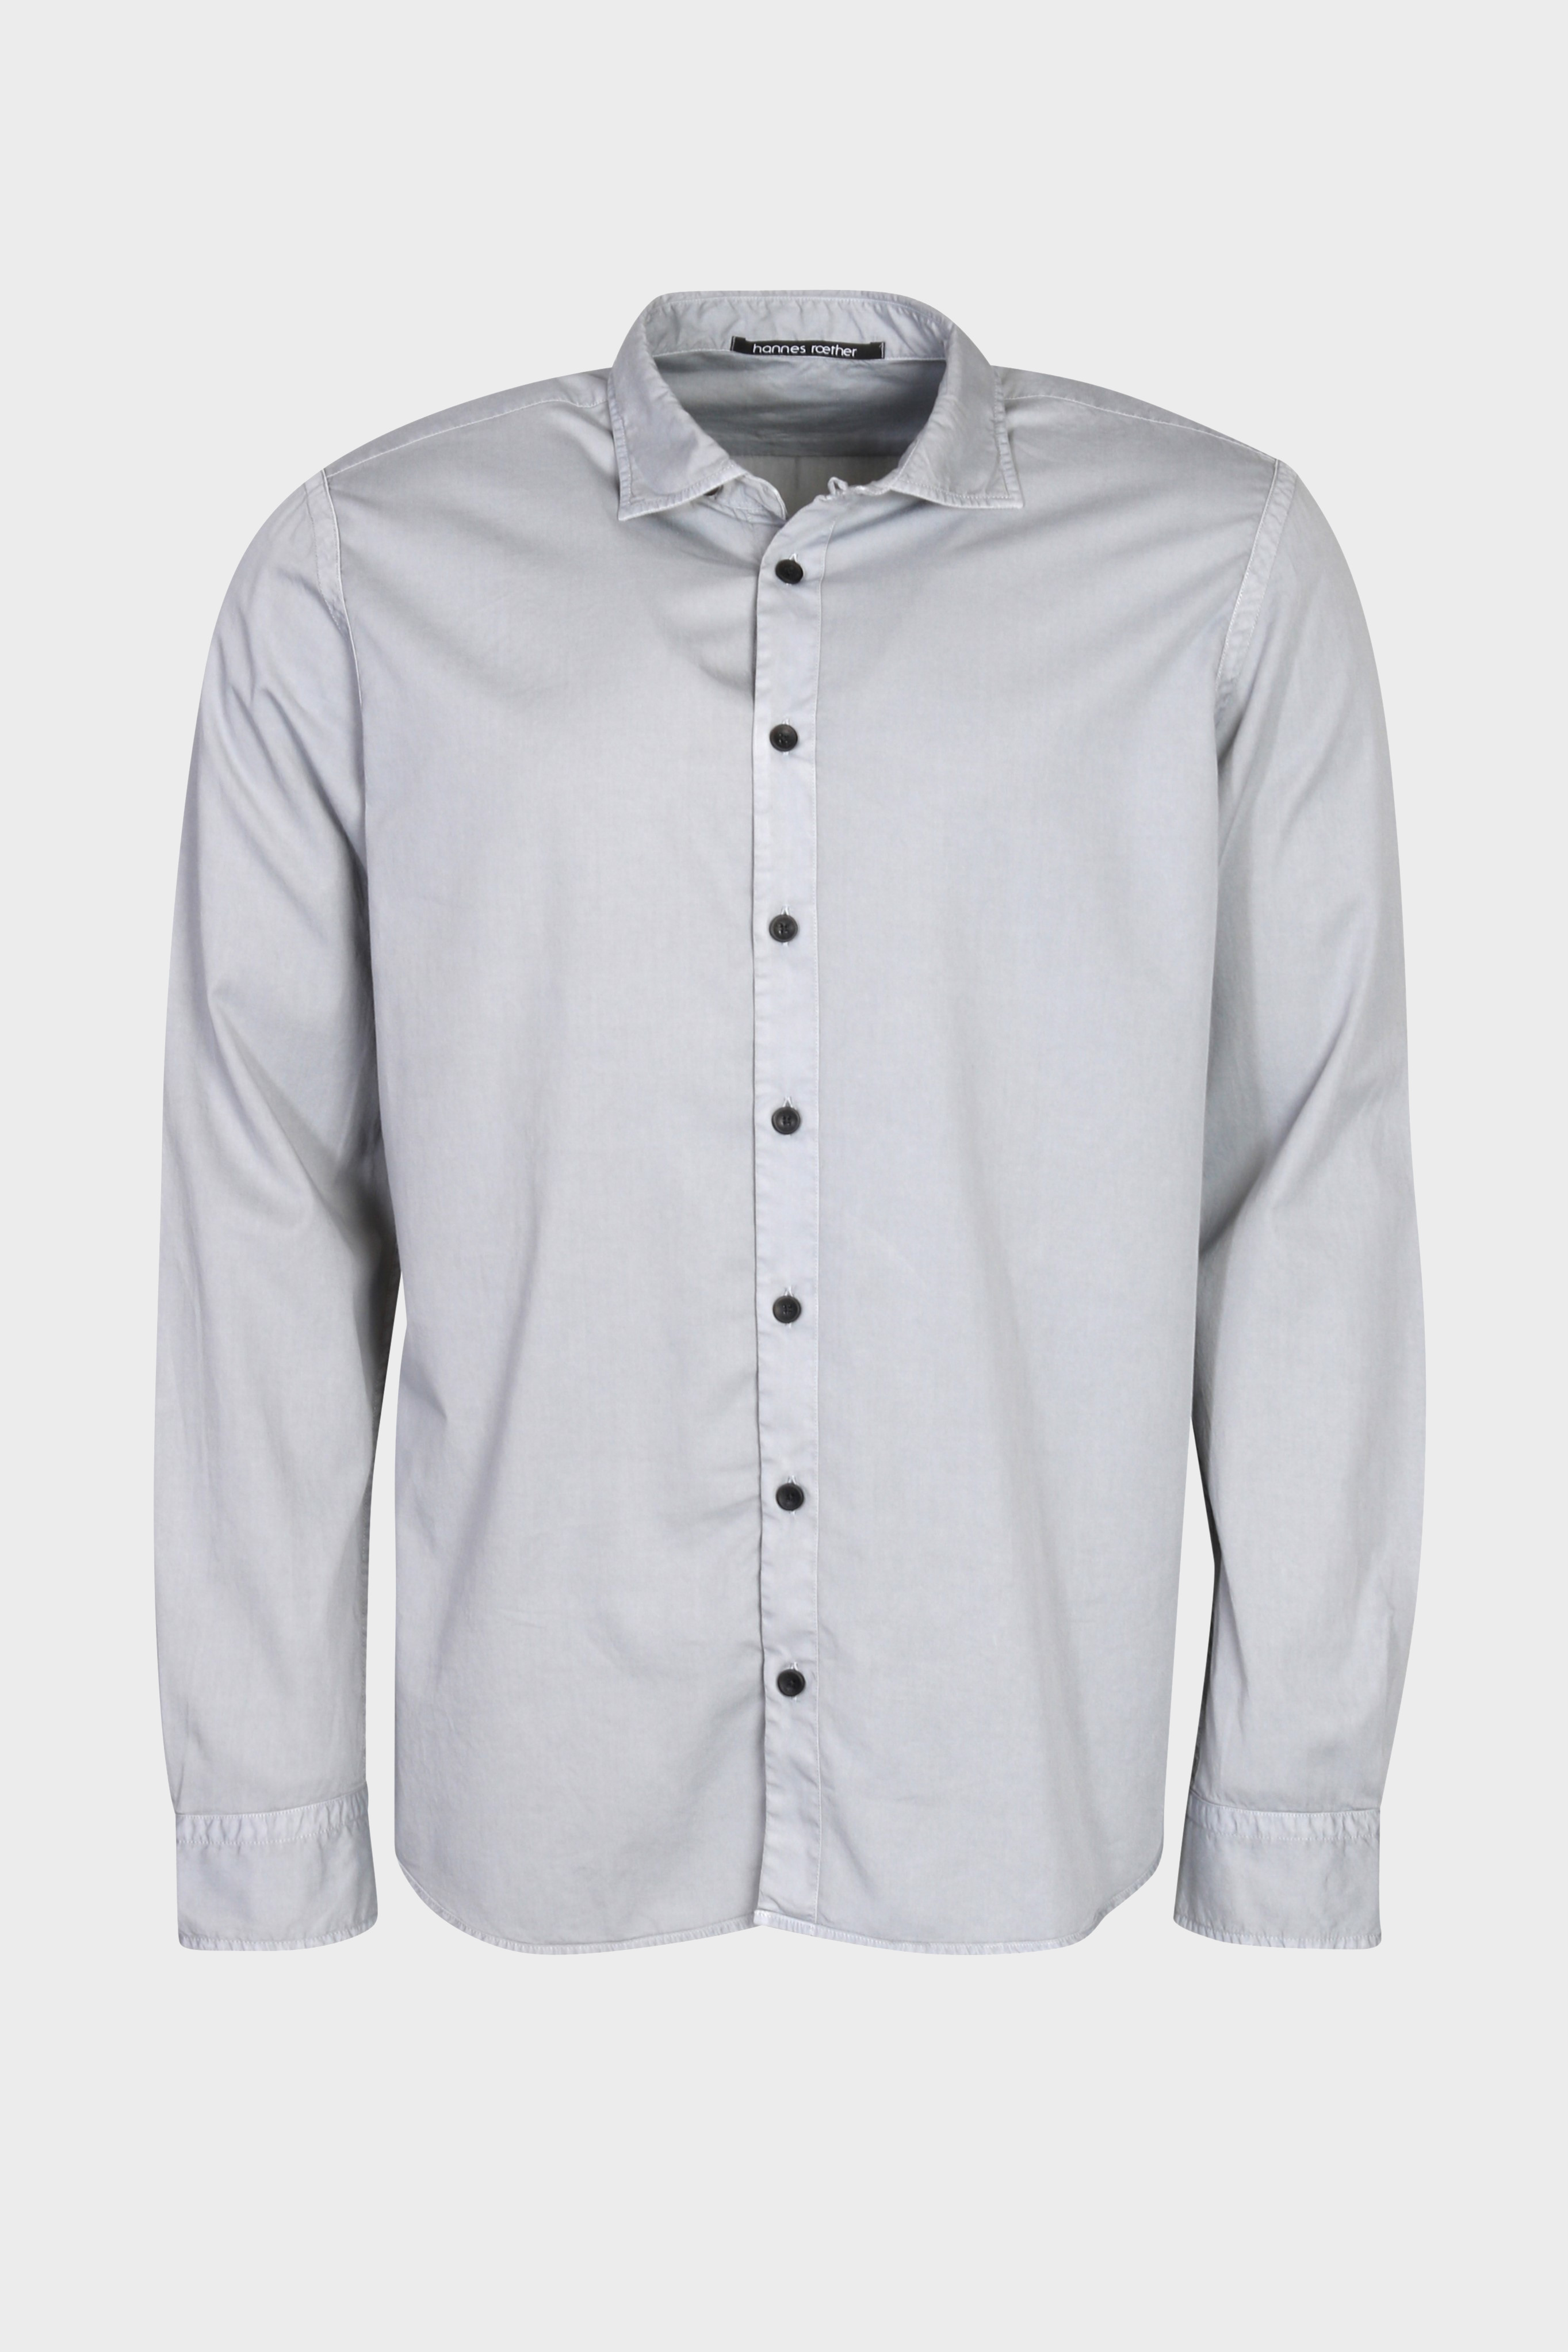 HANNES ROETHER Cotton Shirt in Light Grey M